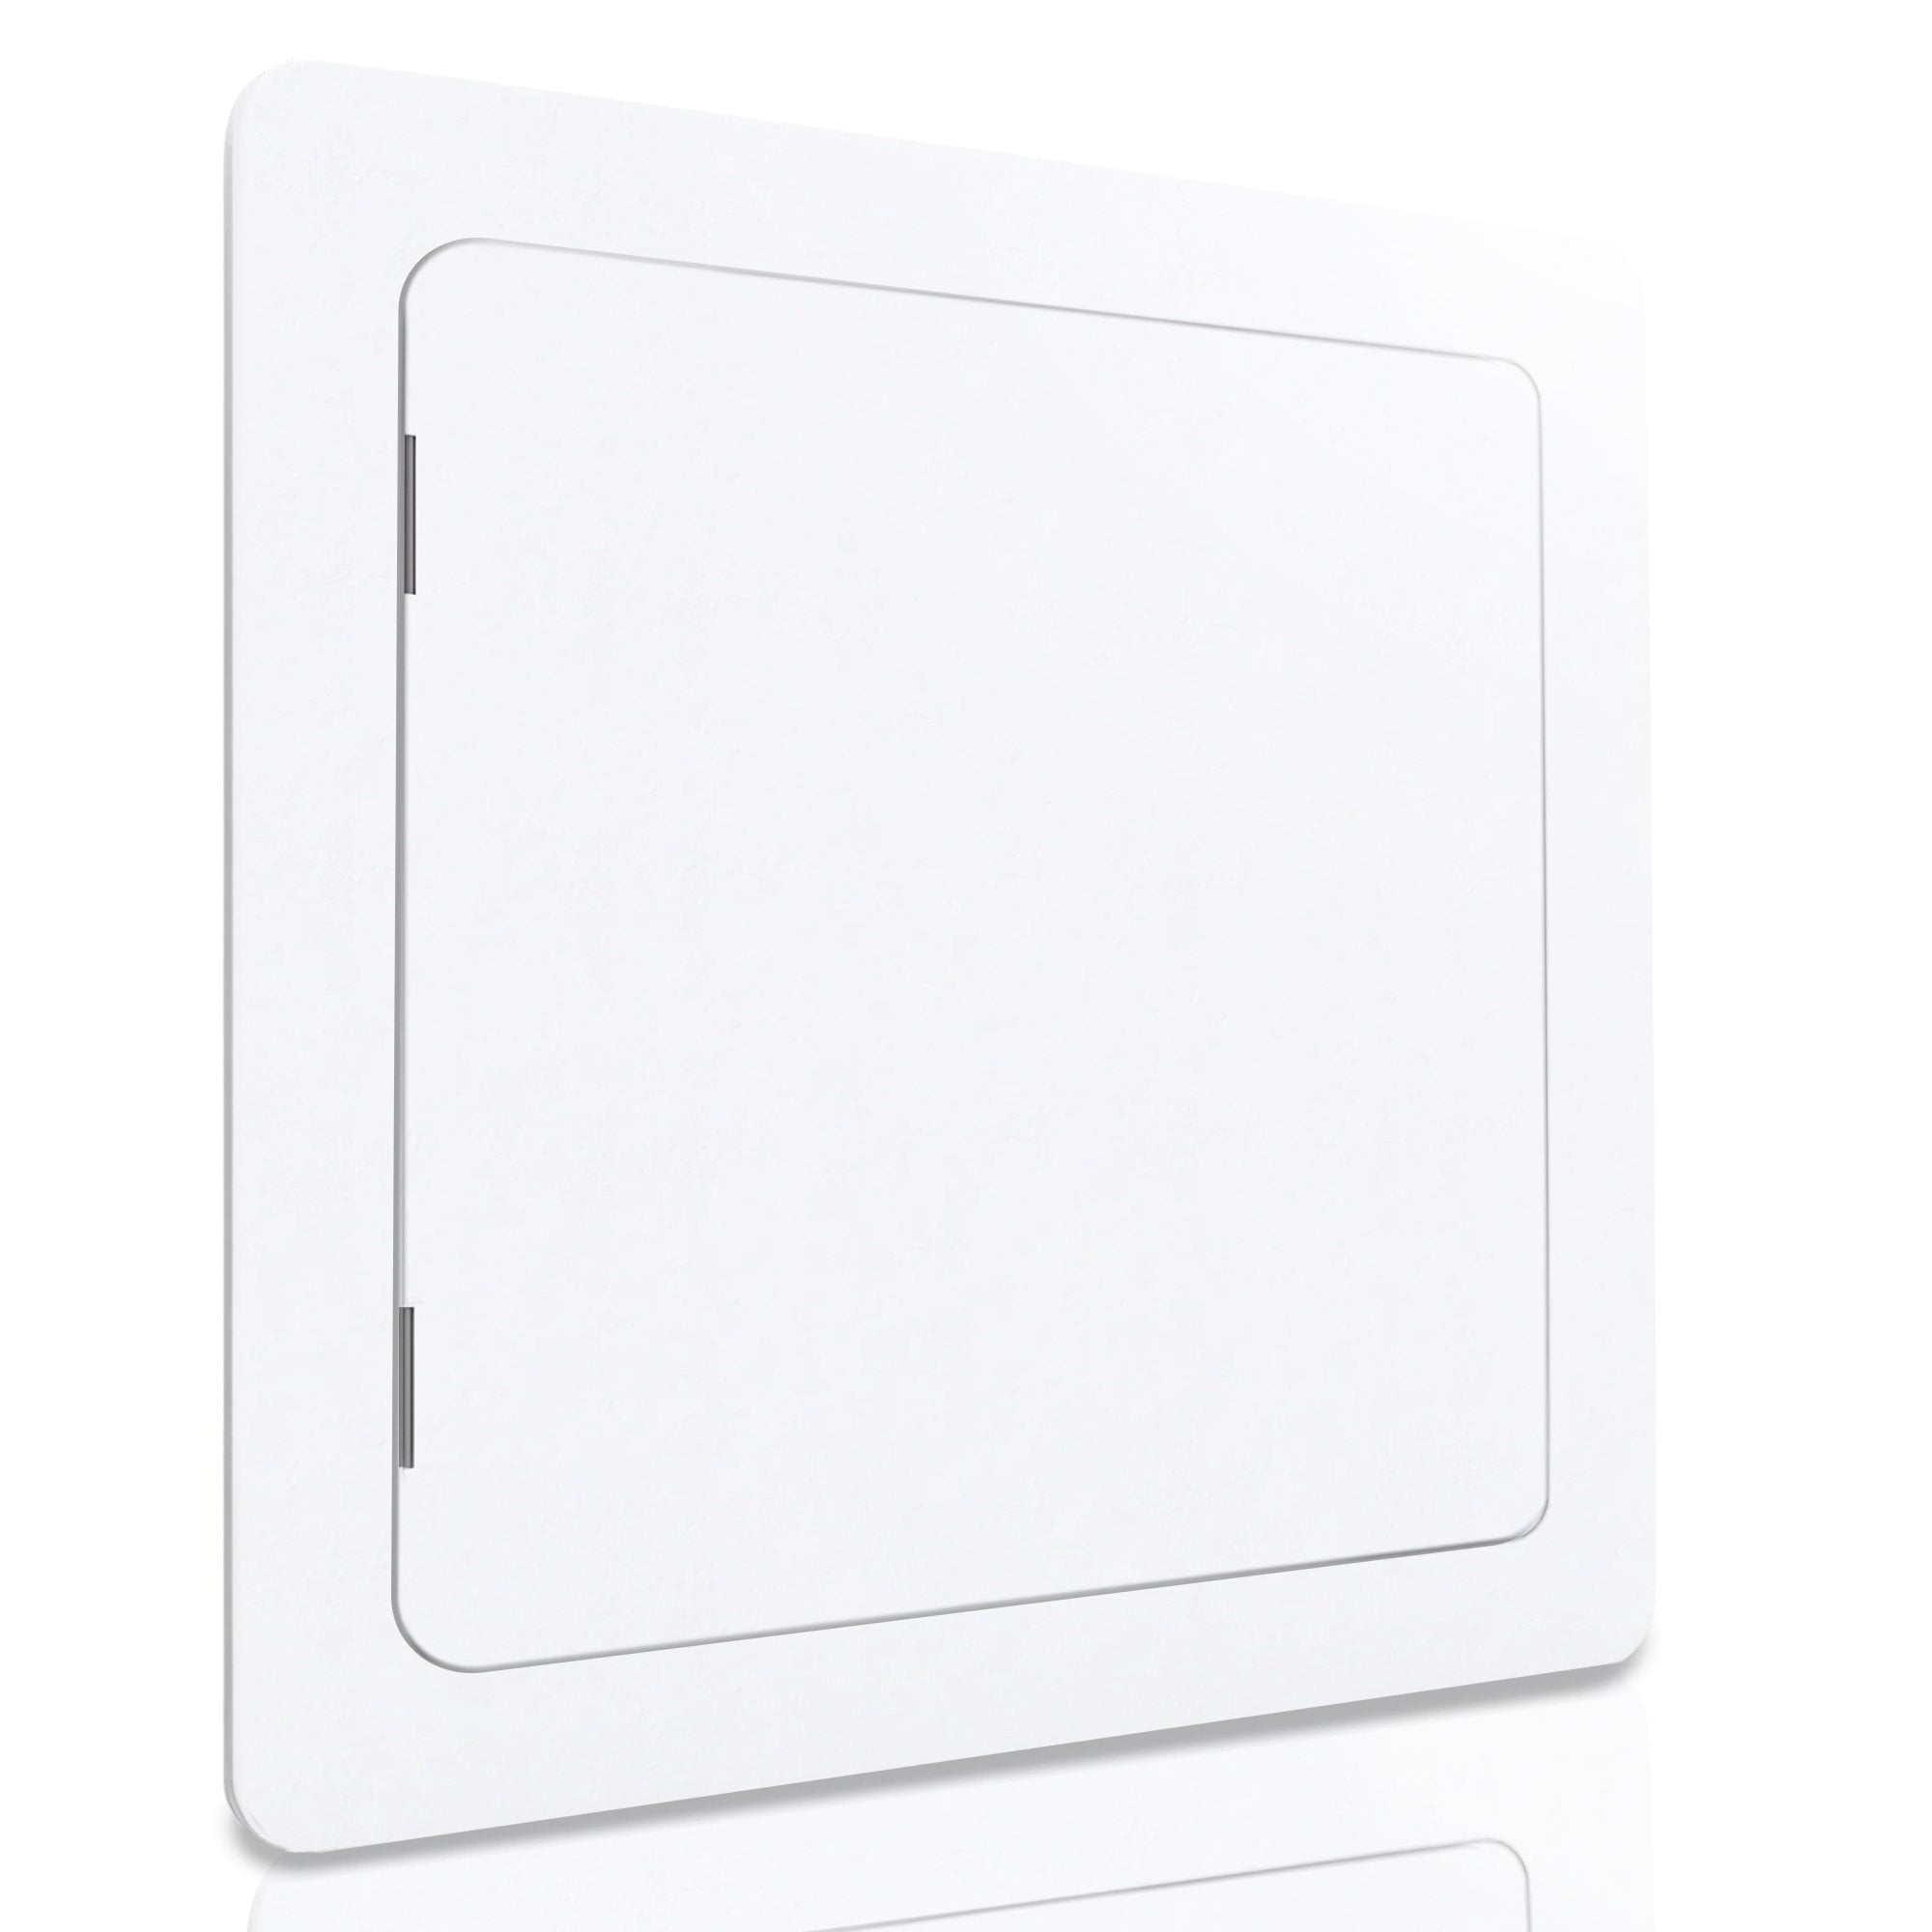 Morvat 12x12 Access Panel with Hinged Door for Drywall & Ceiling ...